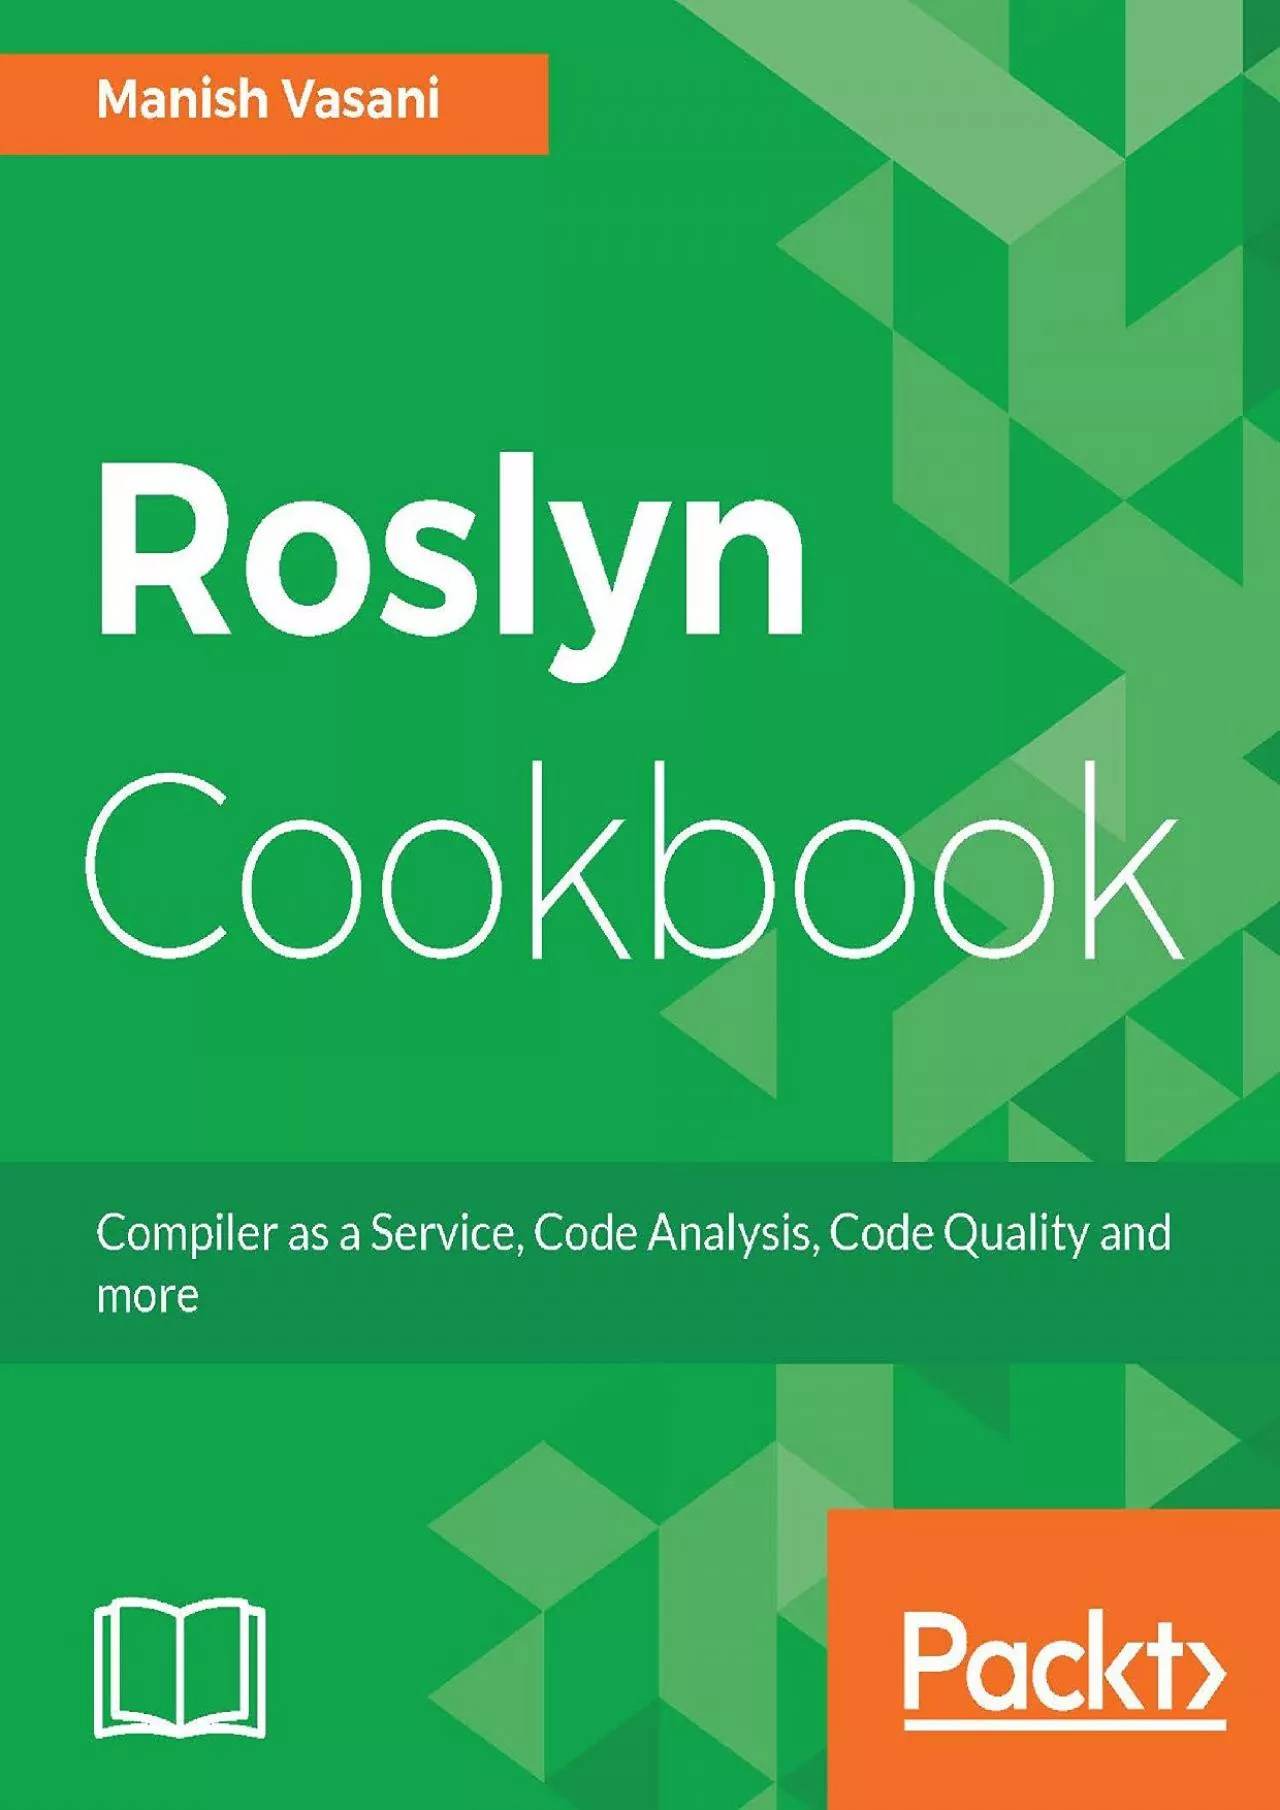 [BEST]-Roslyn Cookbook: Compiler as a Service, Code Analysis, Code Quality and more